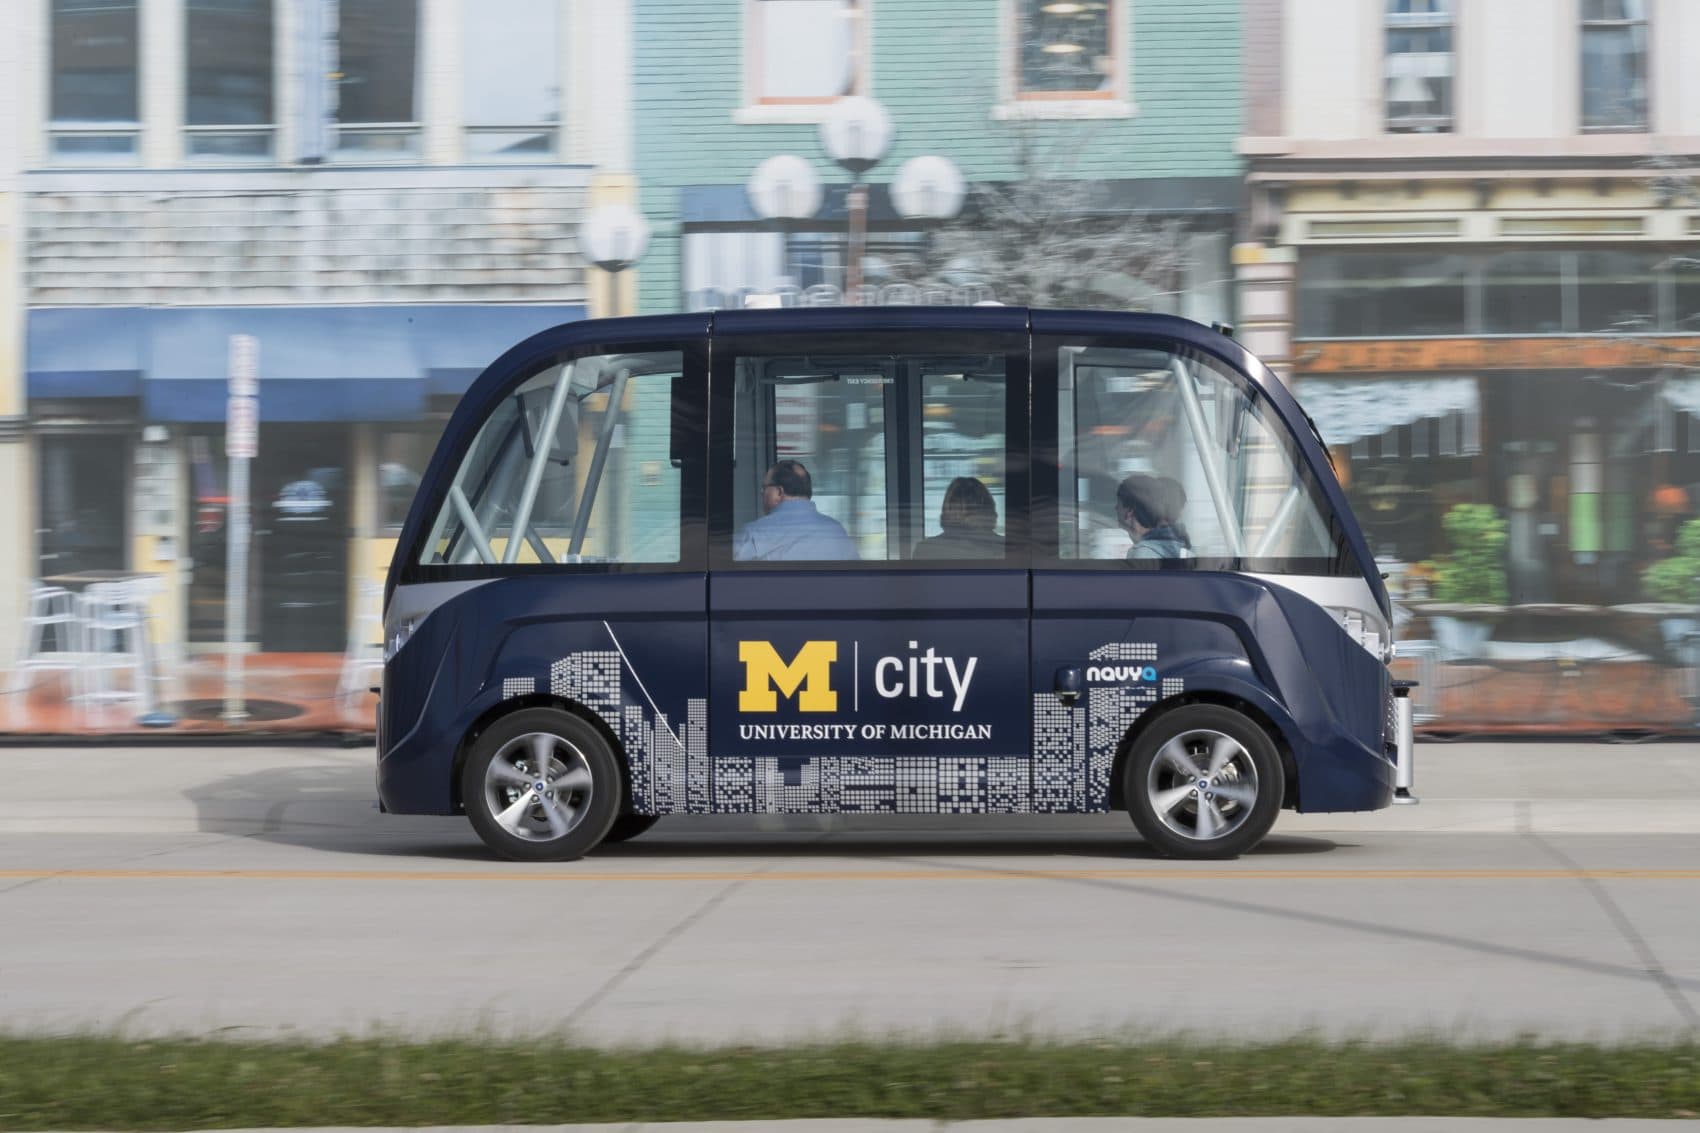 The Arma, a driverless electric shuttle manufactured by French firm NAVYA, was introduced to North America at the Mcity Test Facility in December 2016. (Courtesy University of Michigan)